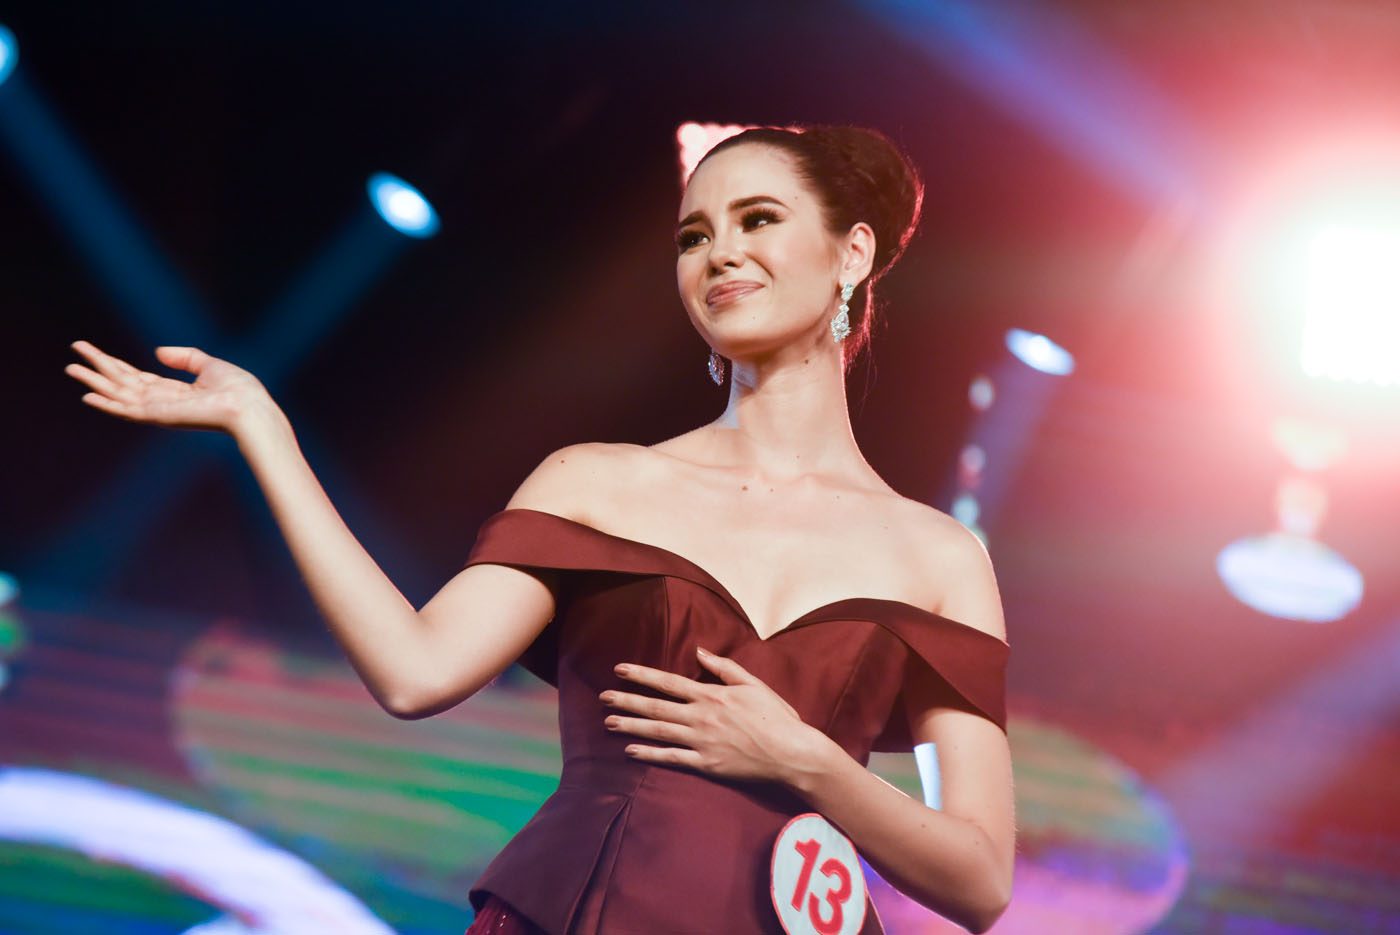 Catriona Gray on her Miss World Philippines 2016 win